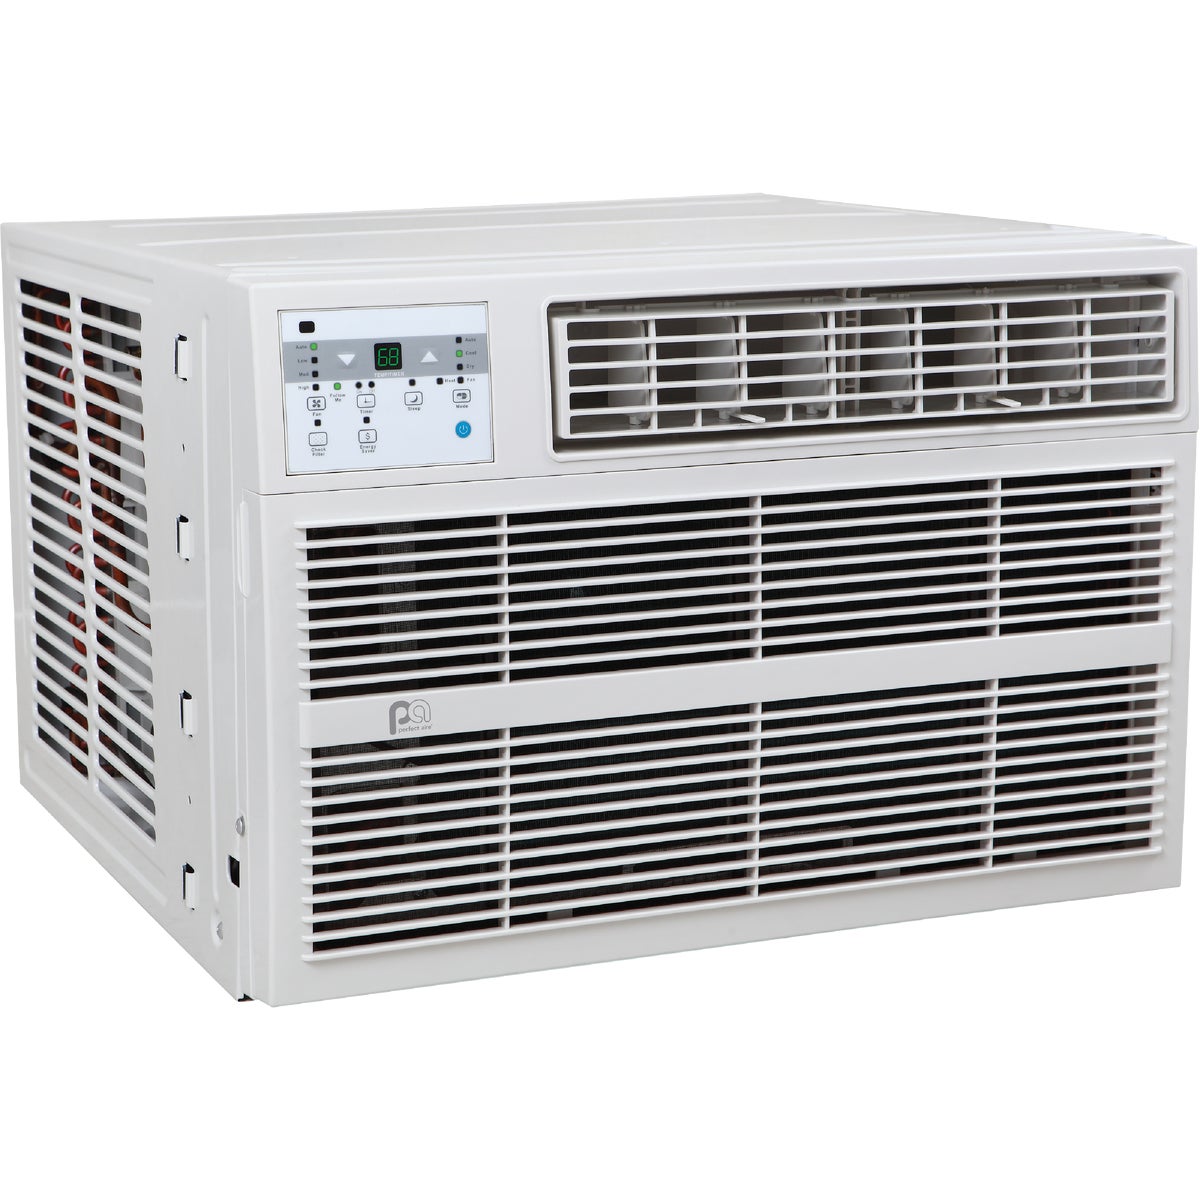 Item 524055, Window air conditioner that also features an electric heater.